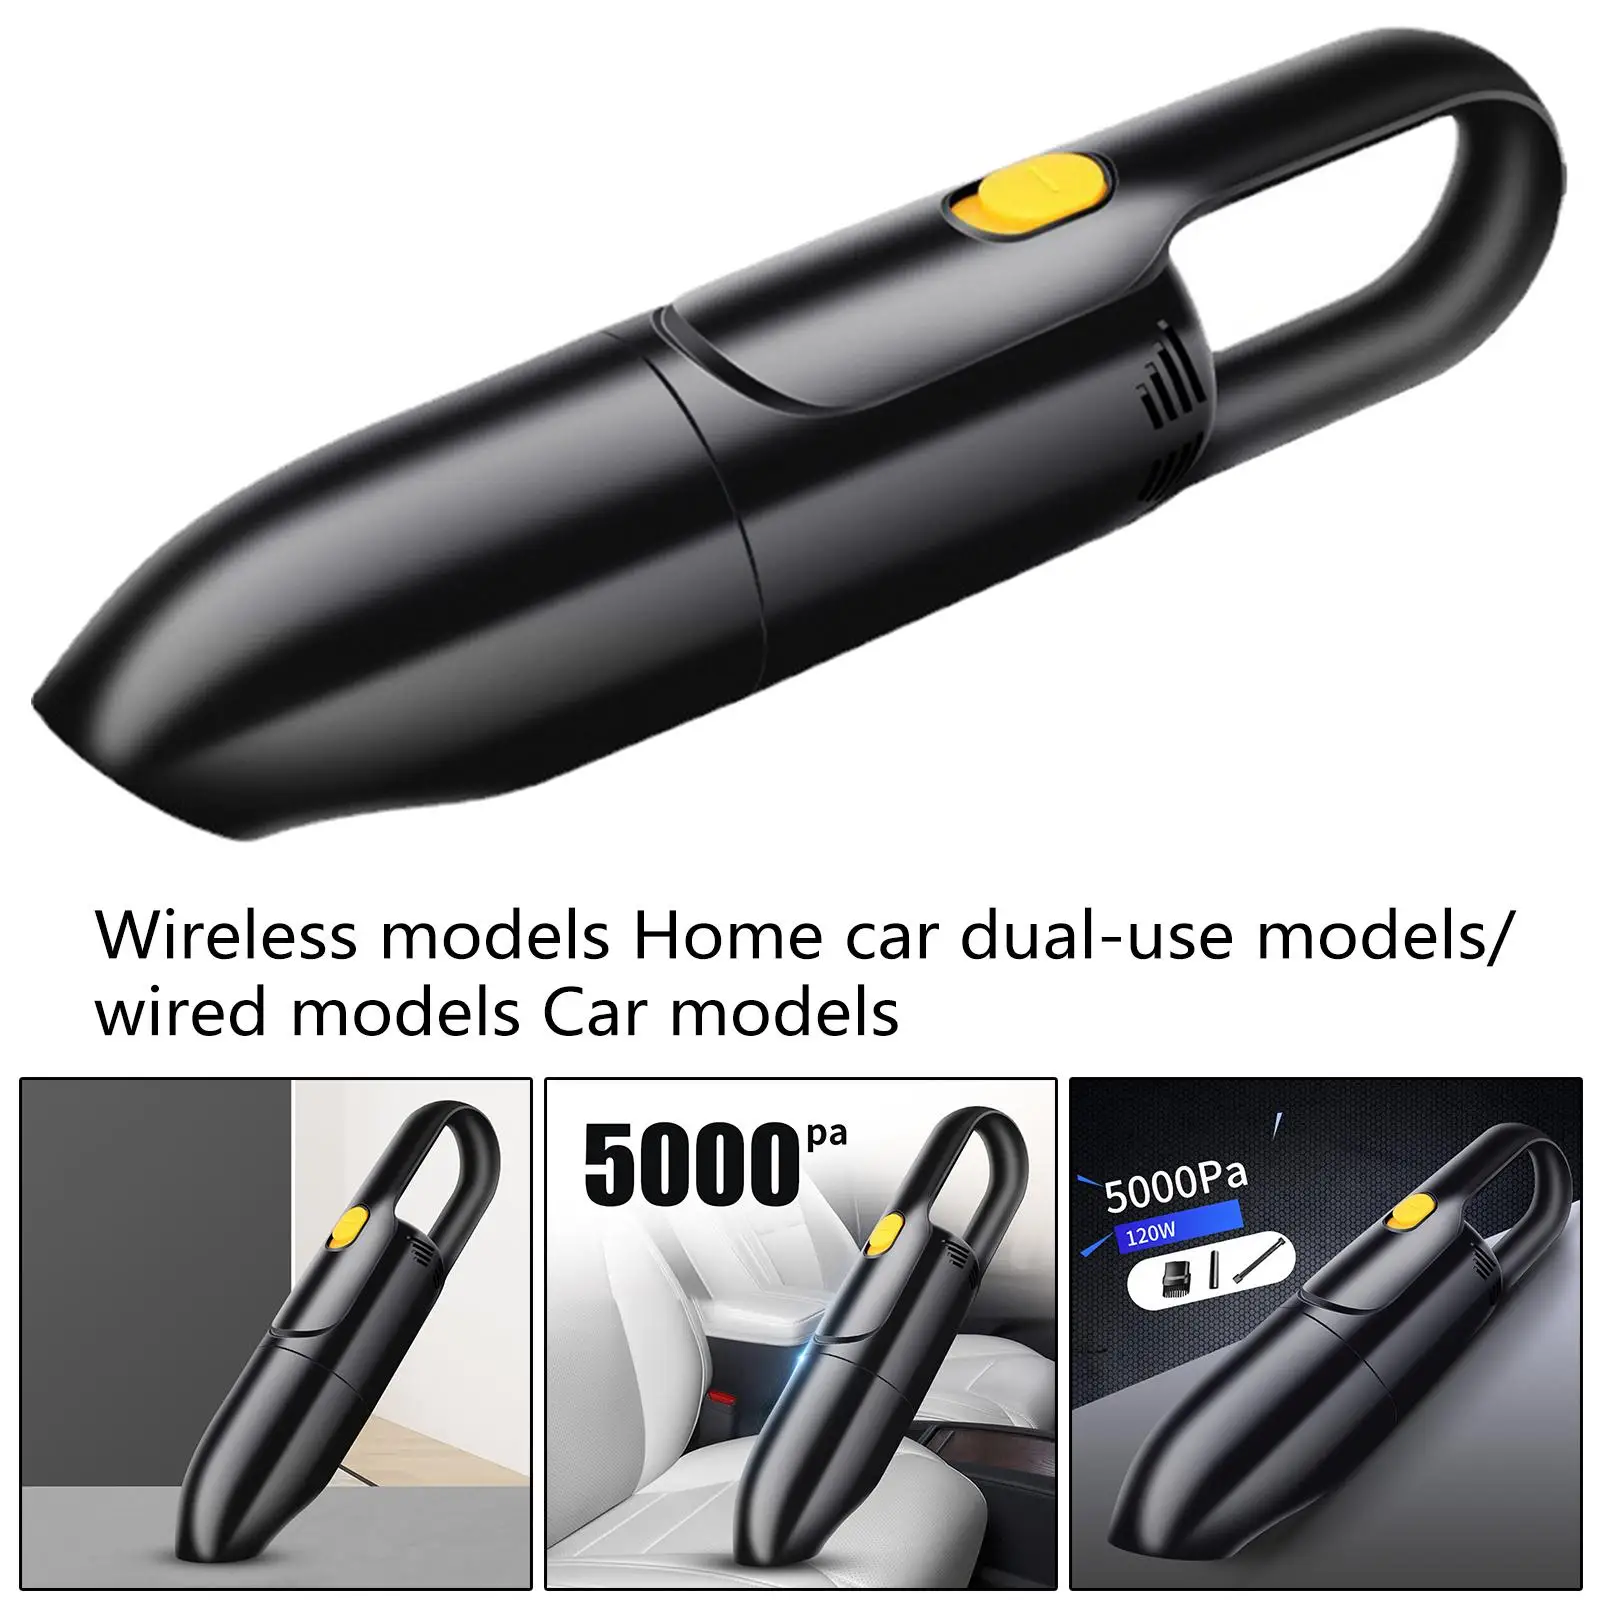 Mini Vacuum Cleaner 120W 3 Attachment Accessories Desktop Vacuum Cleaner Powerful Small Car Vacuum Cleaner Fit for Car Office